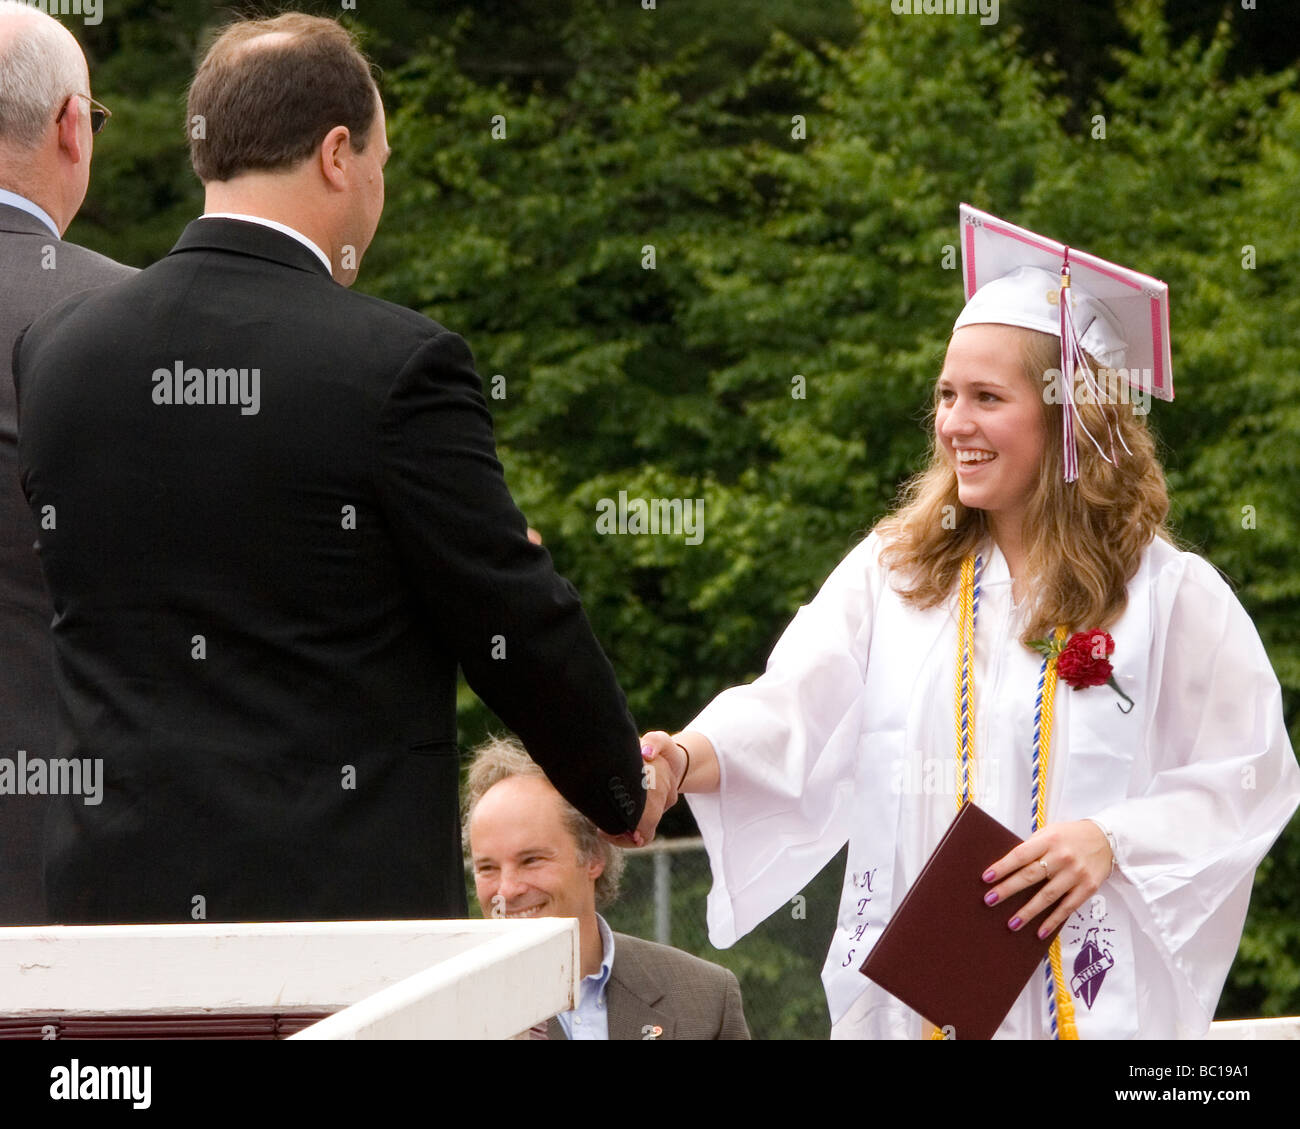 Graduation ceremony, female high school student in cap and gown accepts diploma Stock Photo